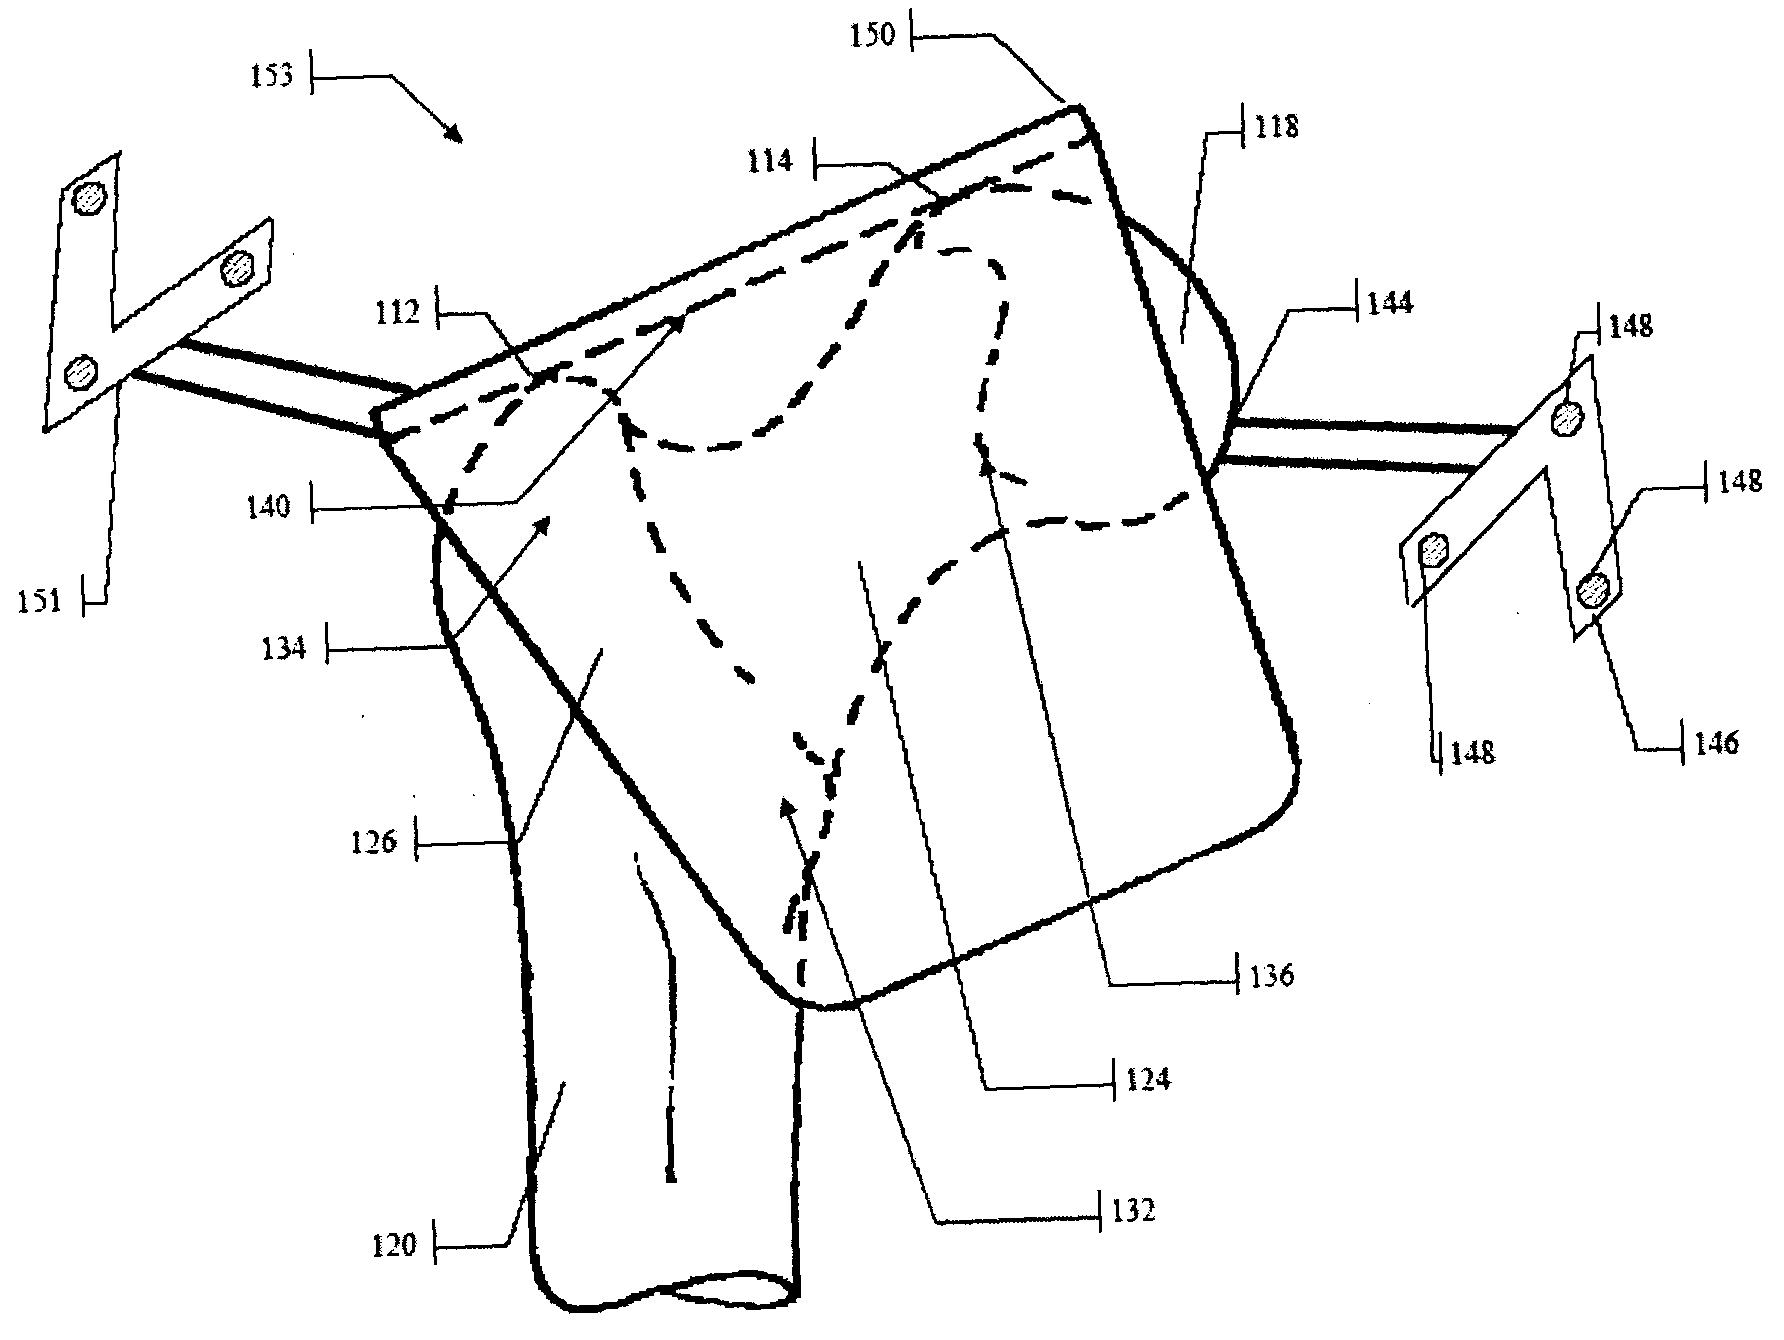 Method and Apparatus for Computer-Assisted Femoral Head Resurfacing